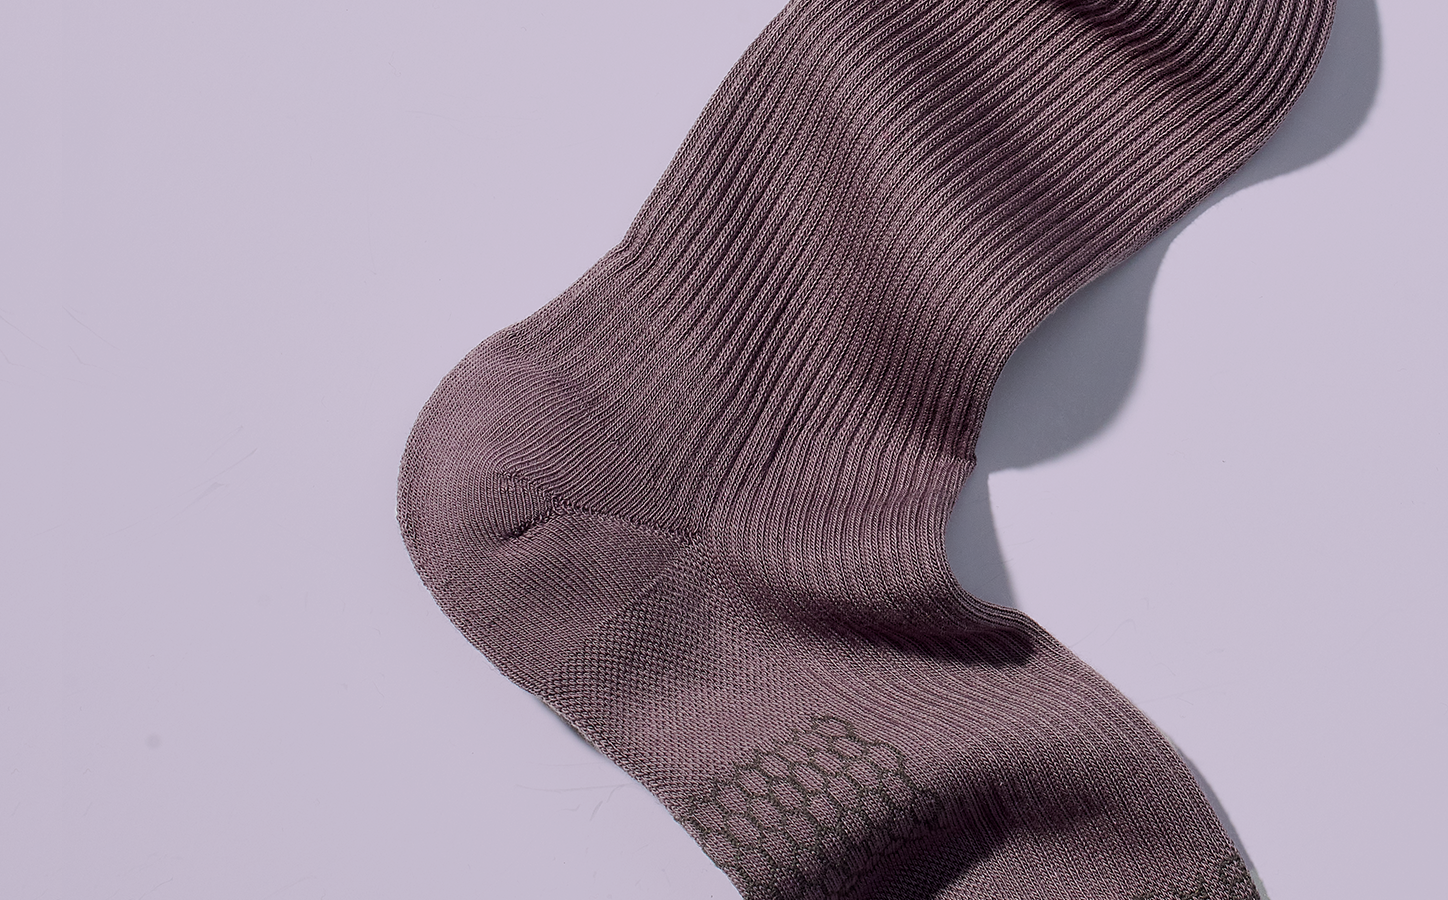 Bombas launches a new collection of basics: The Ribbed Seamless